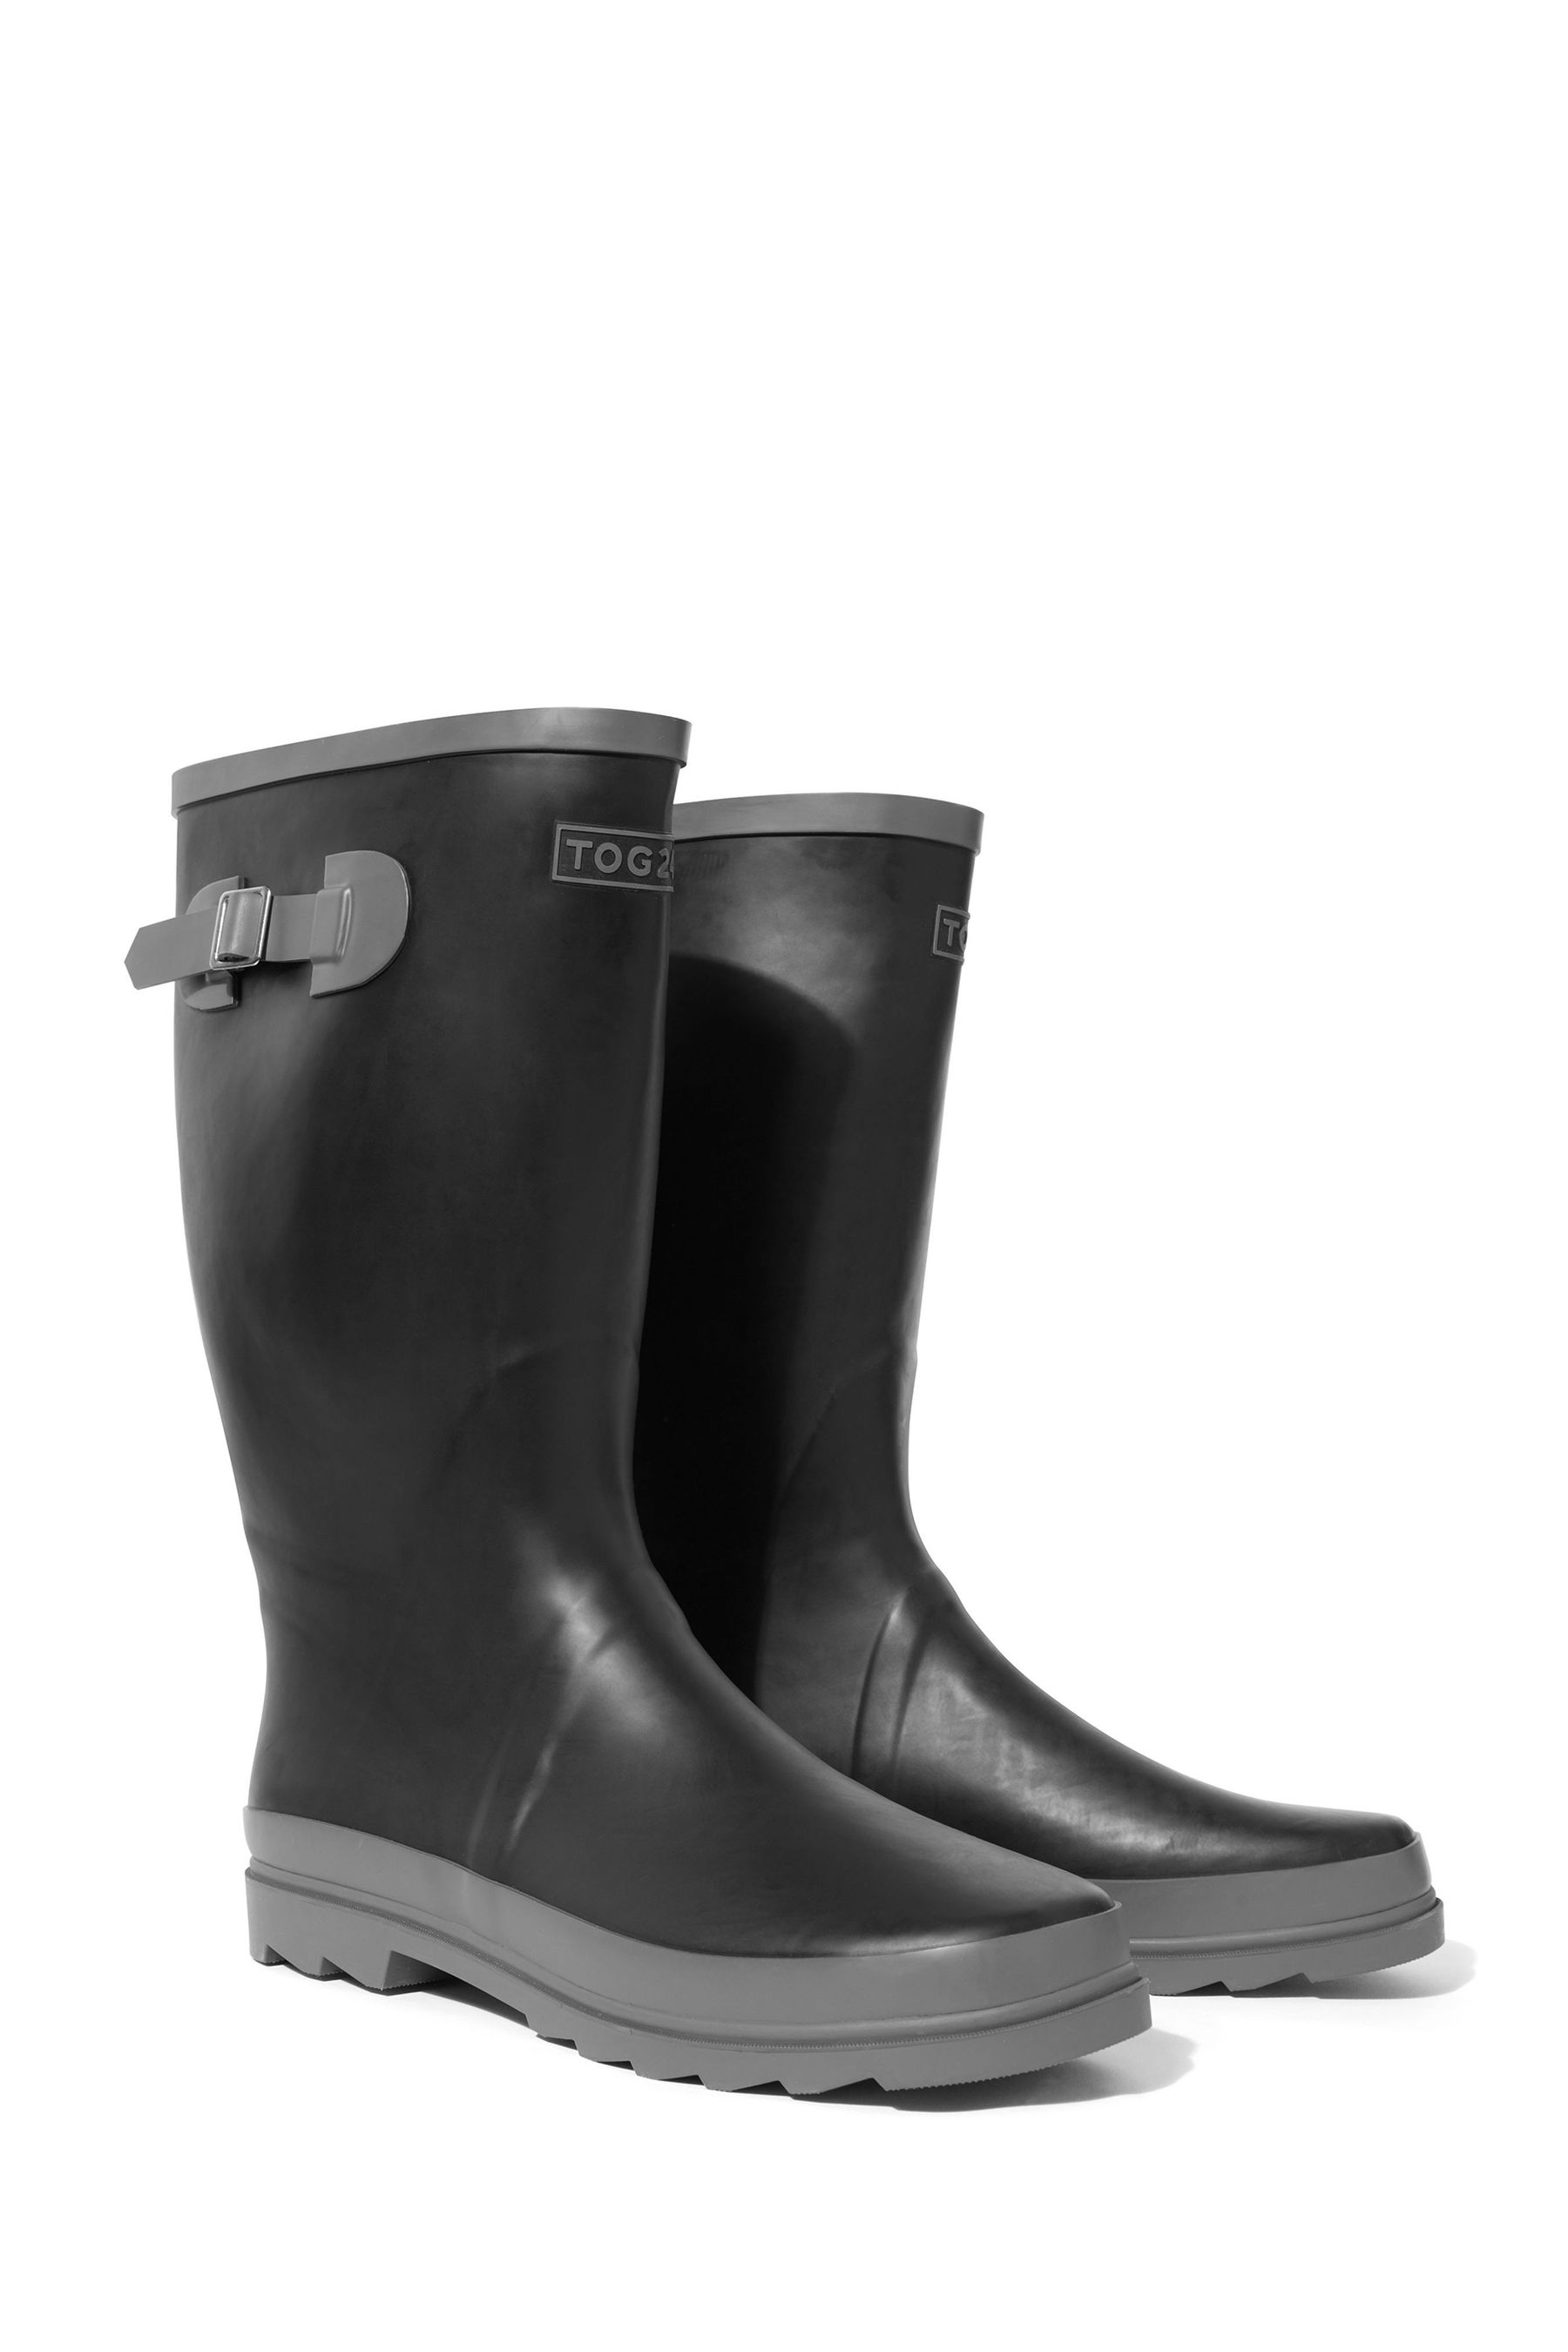 Buy Tog 24 Green Puddle Wellingtons from the Next UK online shop